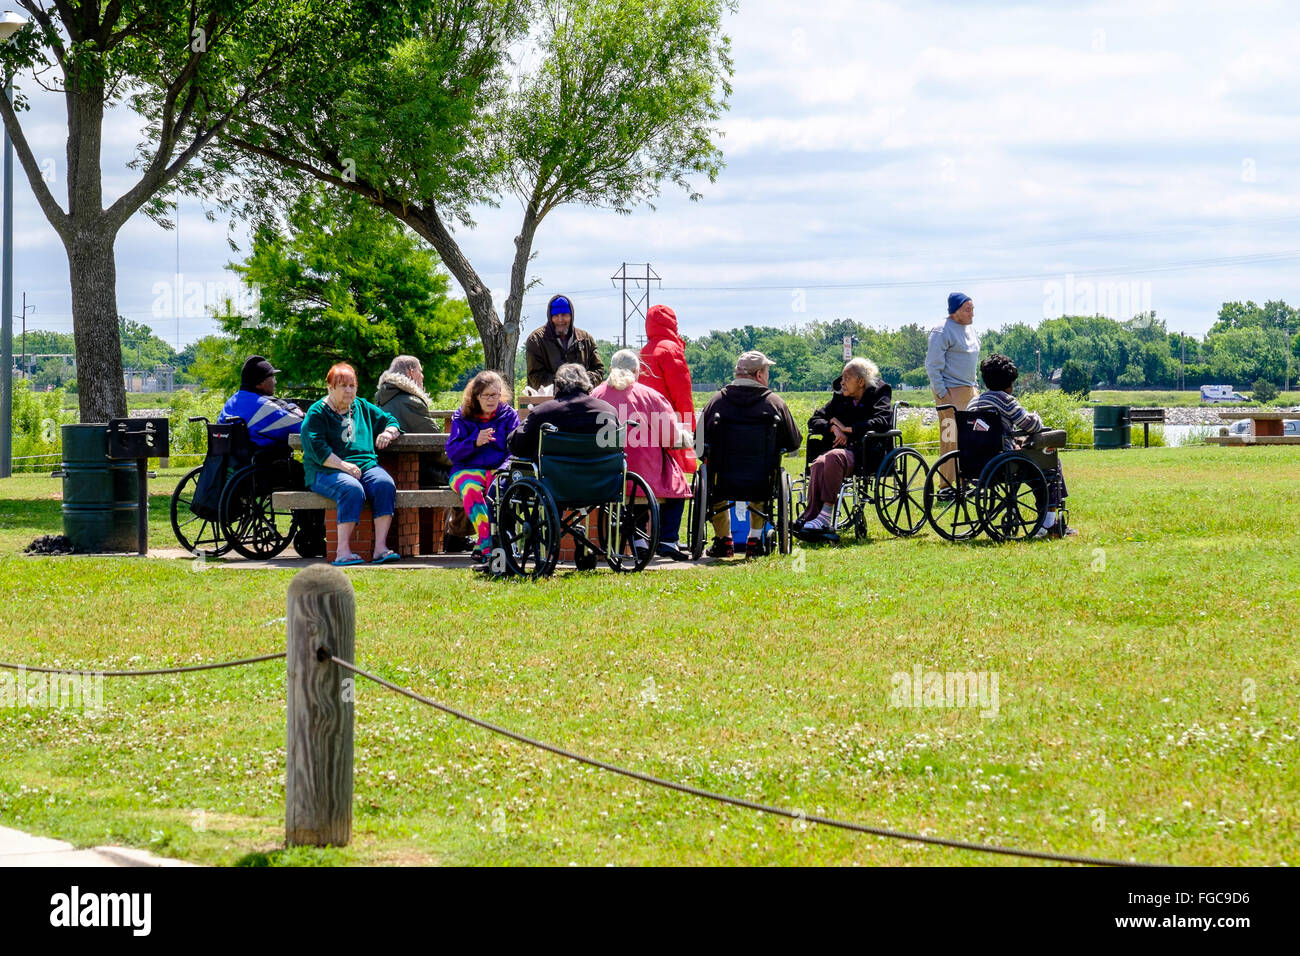 Handicapped and old folks are taken for an outing on the picnic grounds of Lake Hefner in Oklahoma City, Oklahoma, USA. Stock Photo